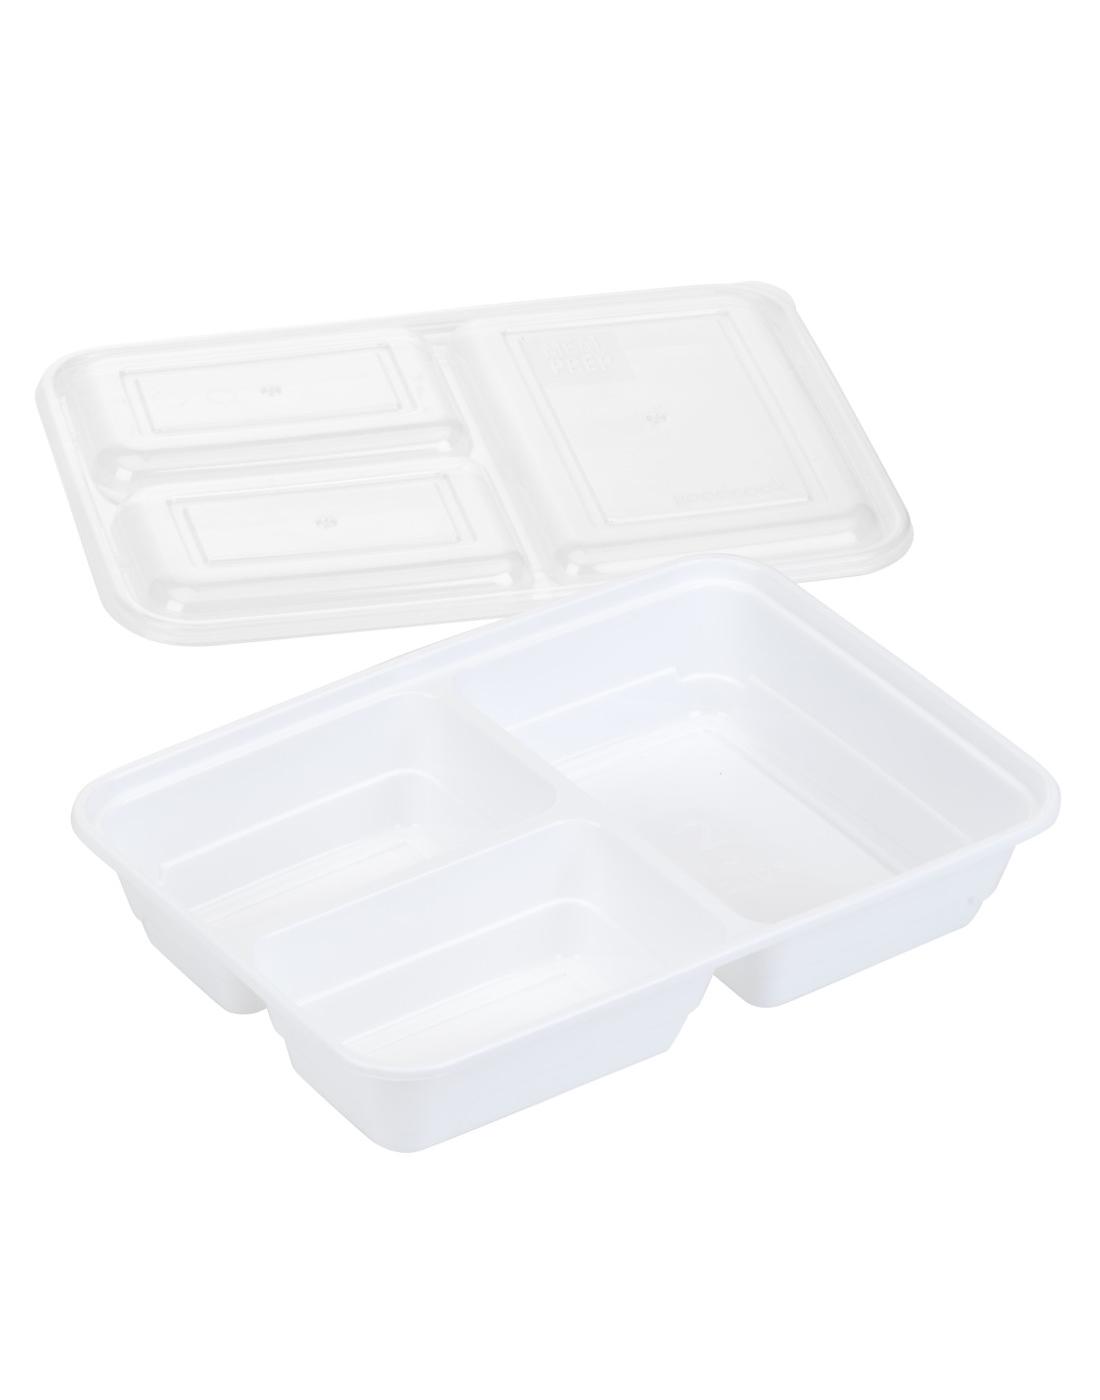 GoodCook 3 Compartment Rectangle Meal Prep Containers; image 2 of 5